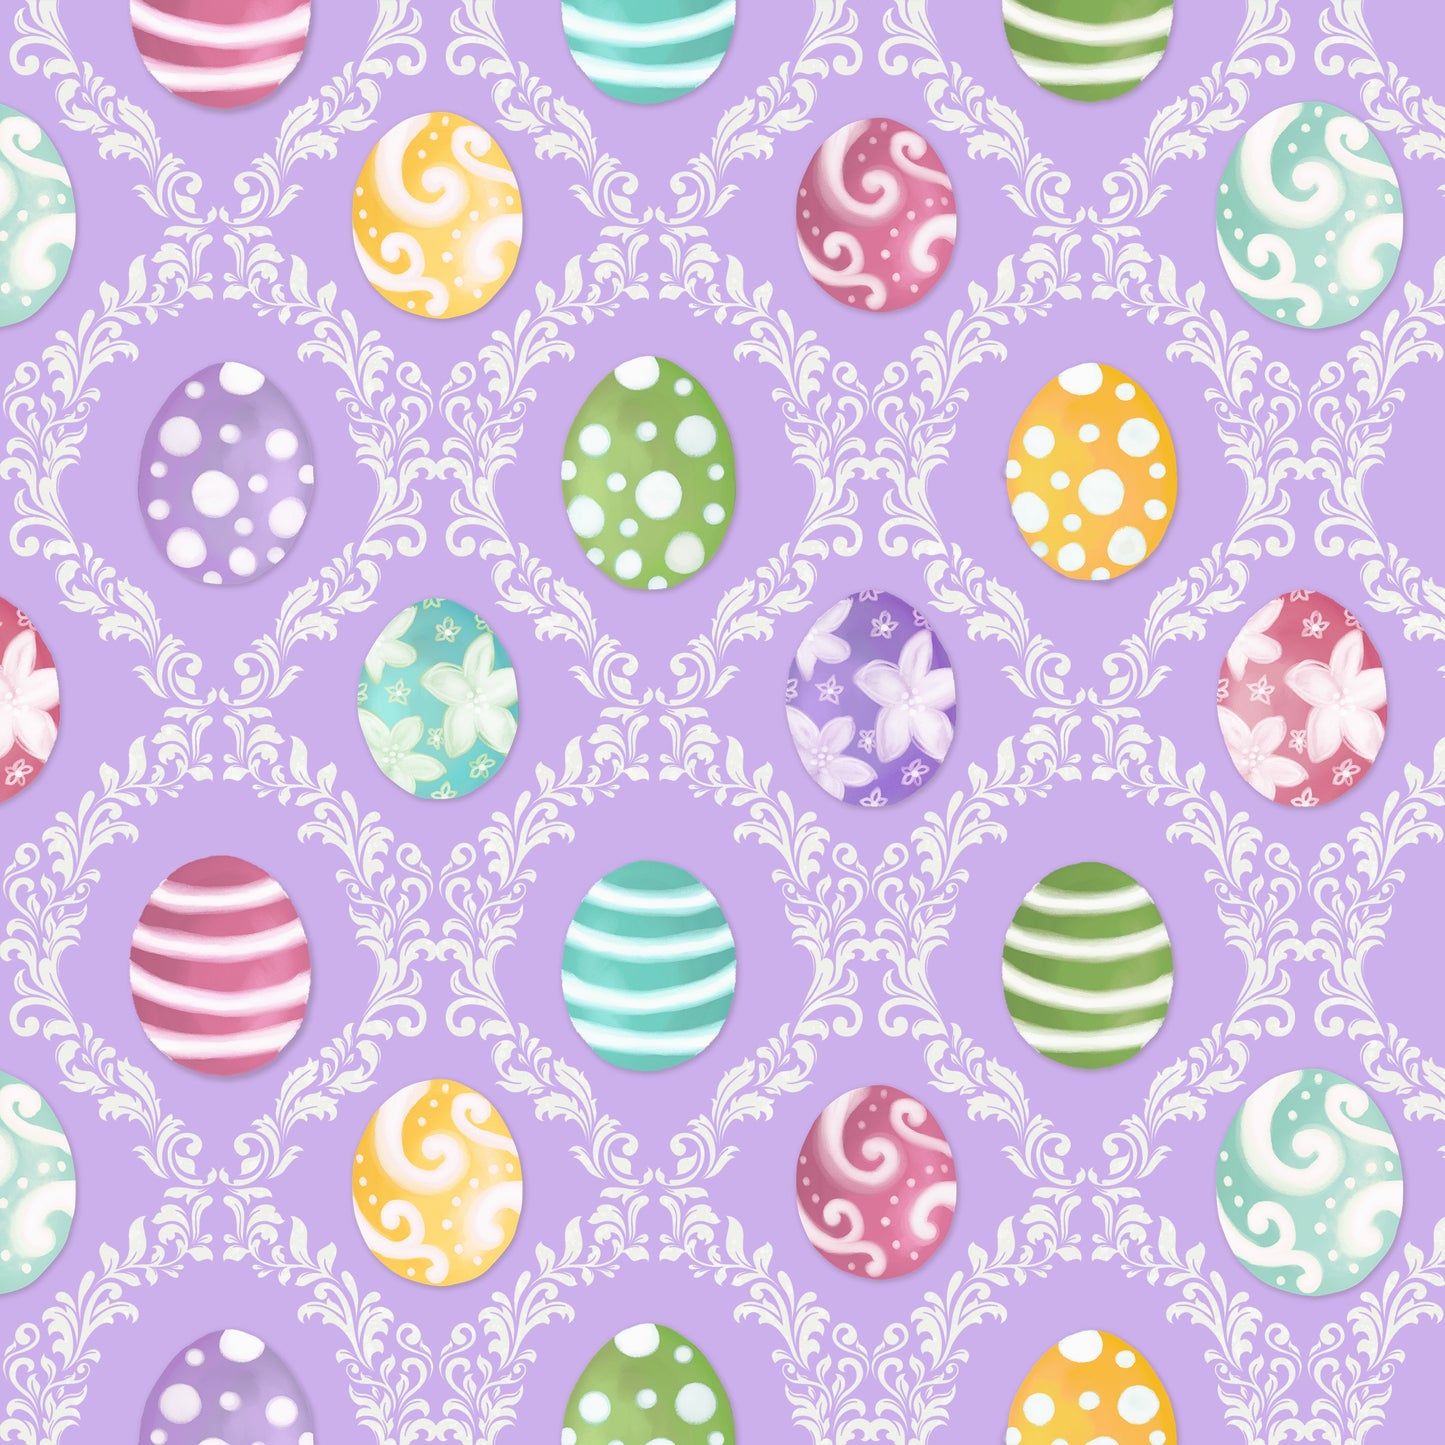 Hoppy Easter by AJ Watercolor Studio Easter Egg Harlequin 9525-44 Cotton Woven Fabric